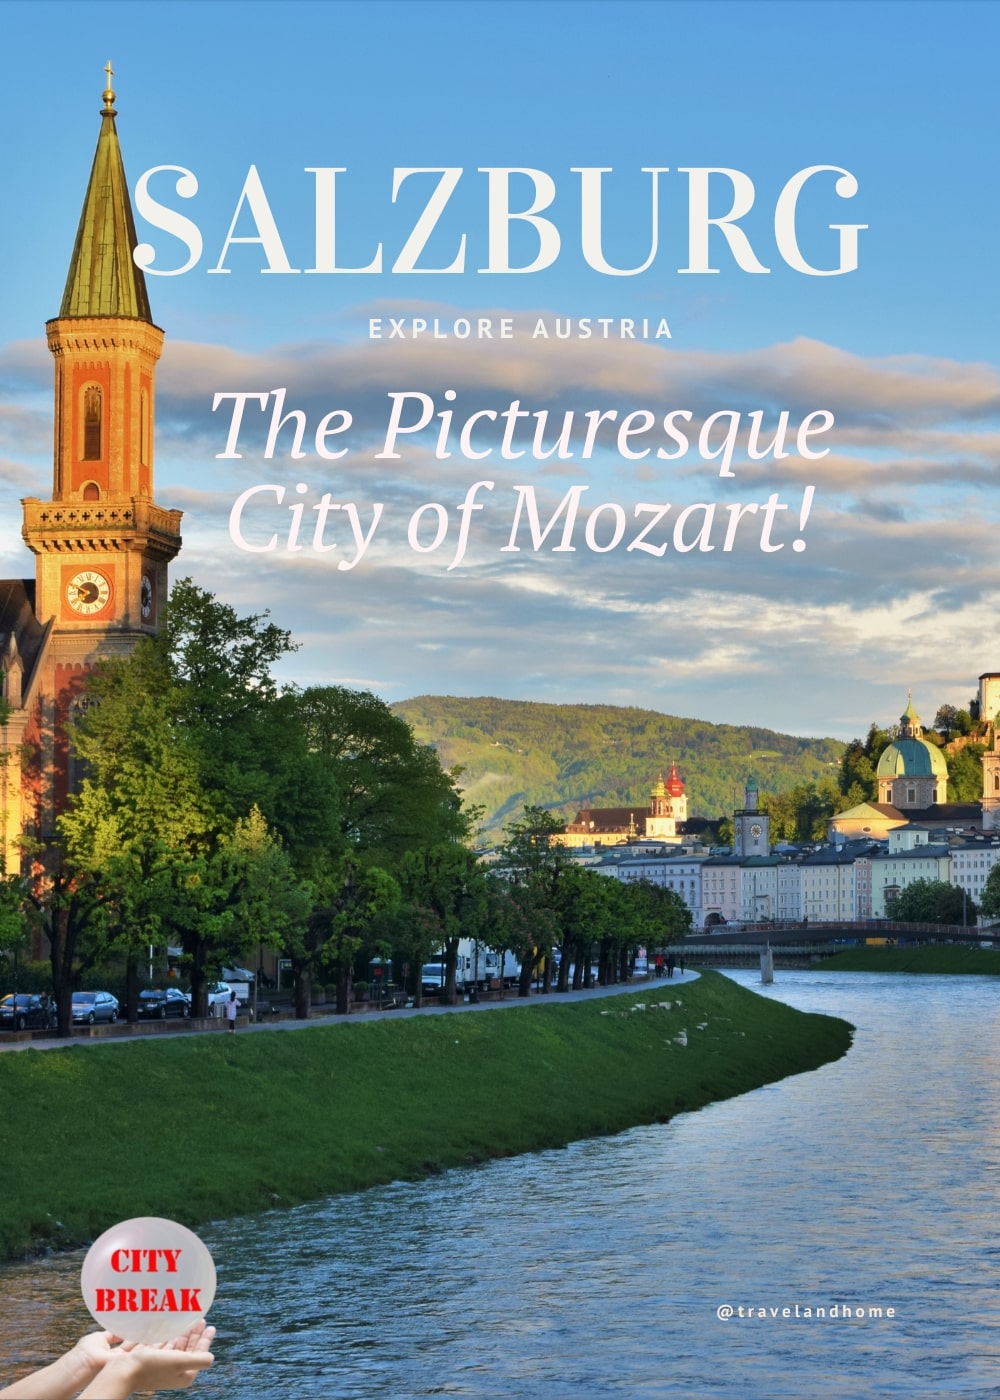 Salzburg holiday the picturesque city of Mozart Austria travel and home guide first time in Salzburg things to do city break min